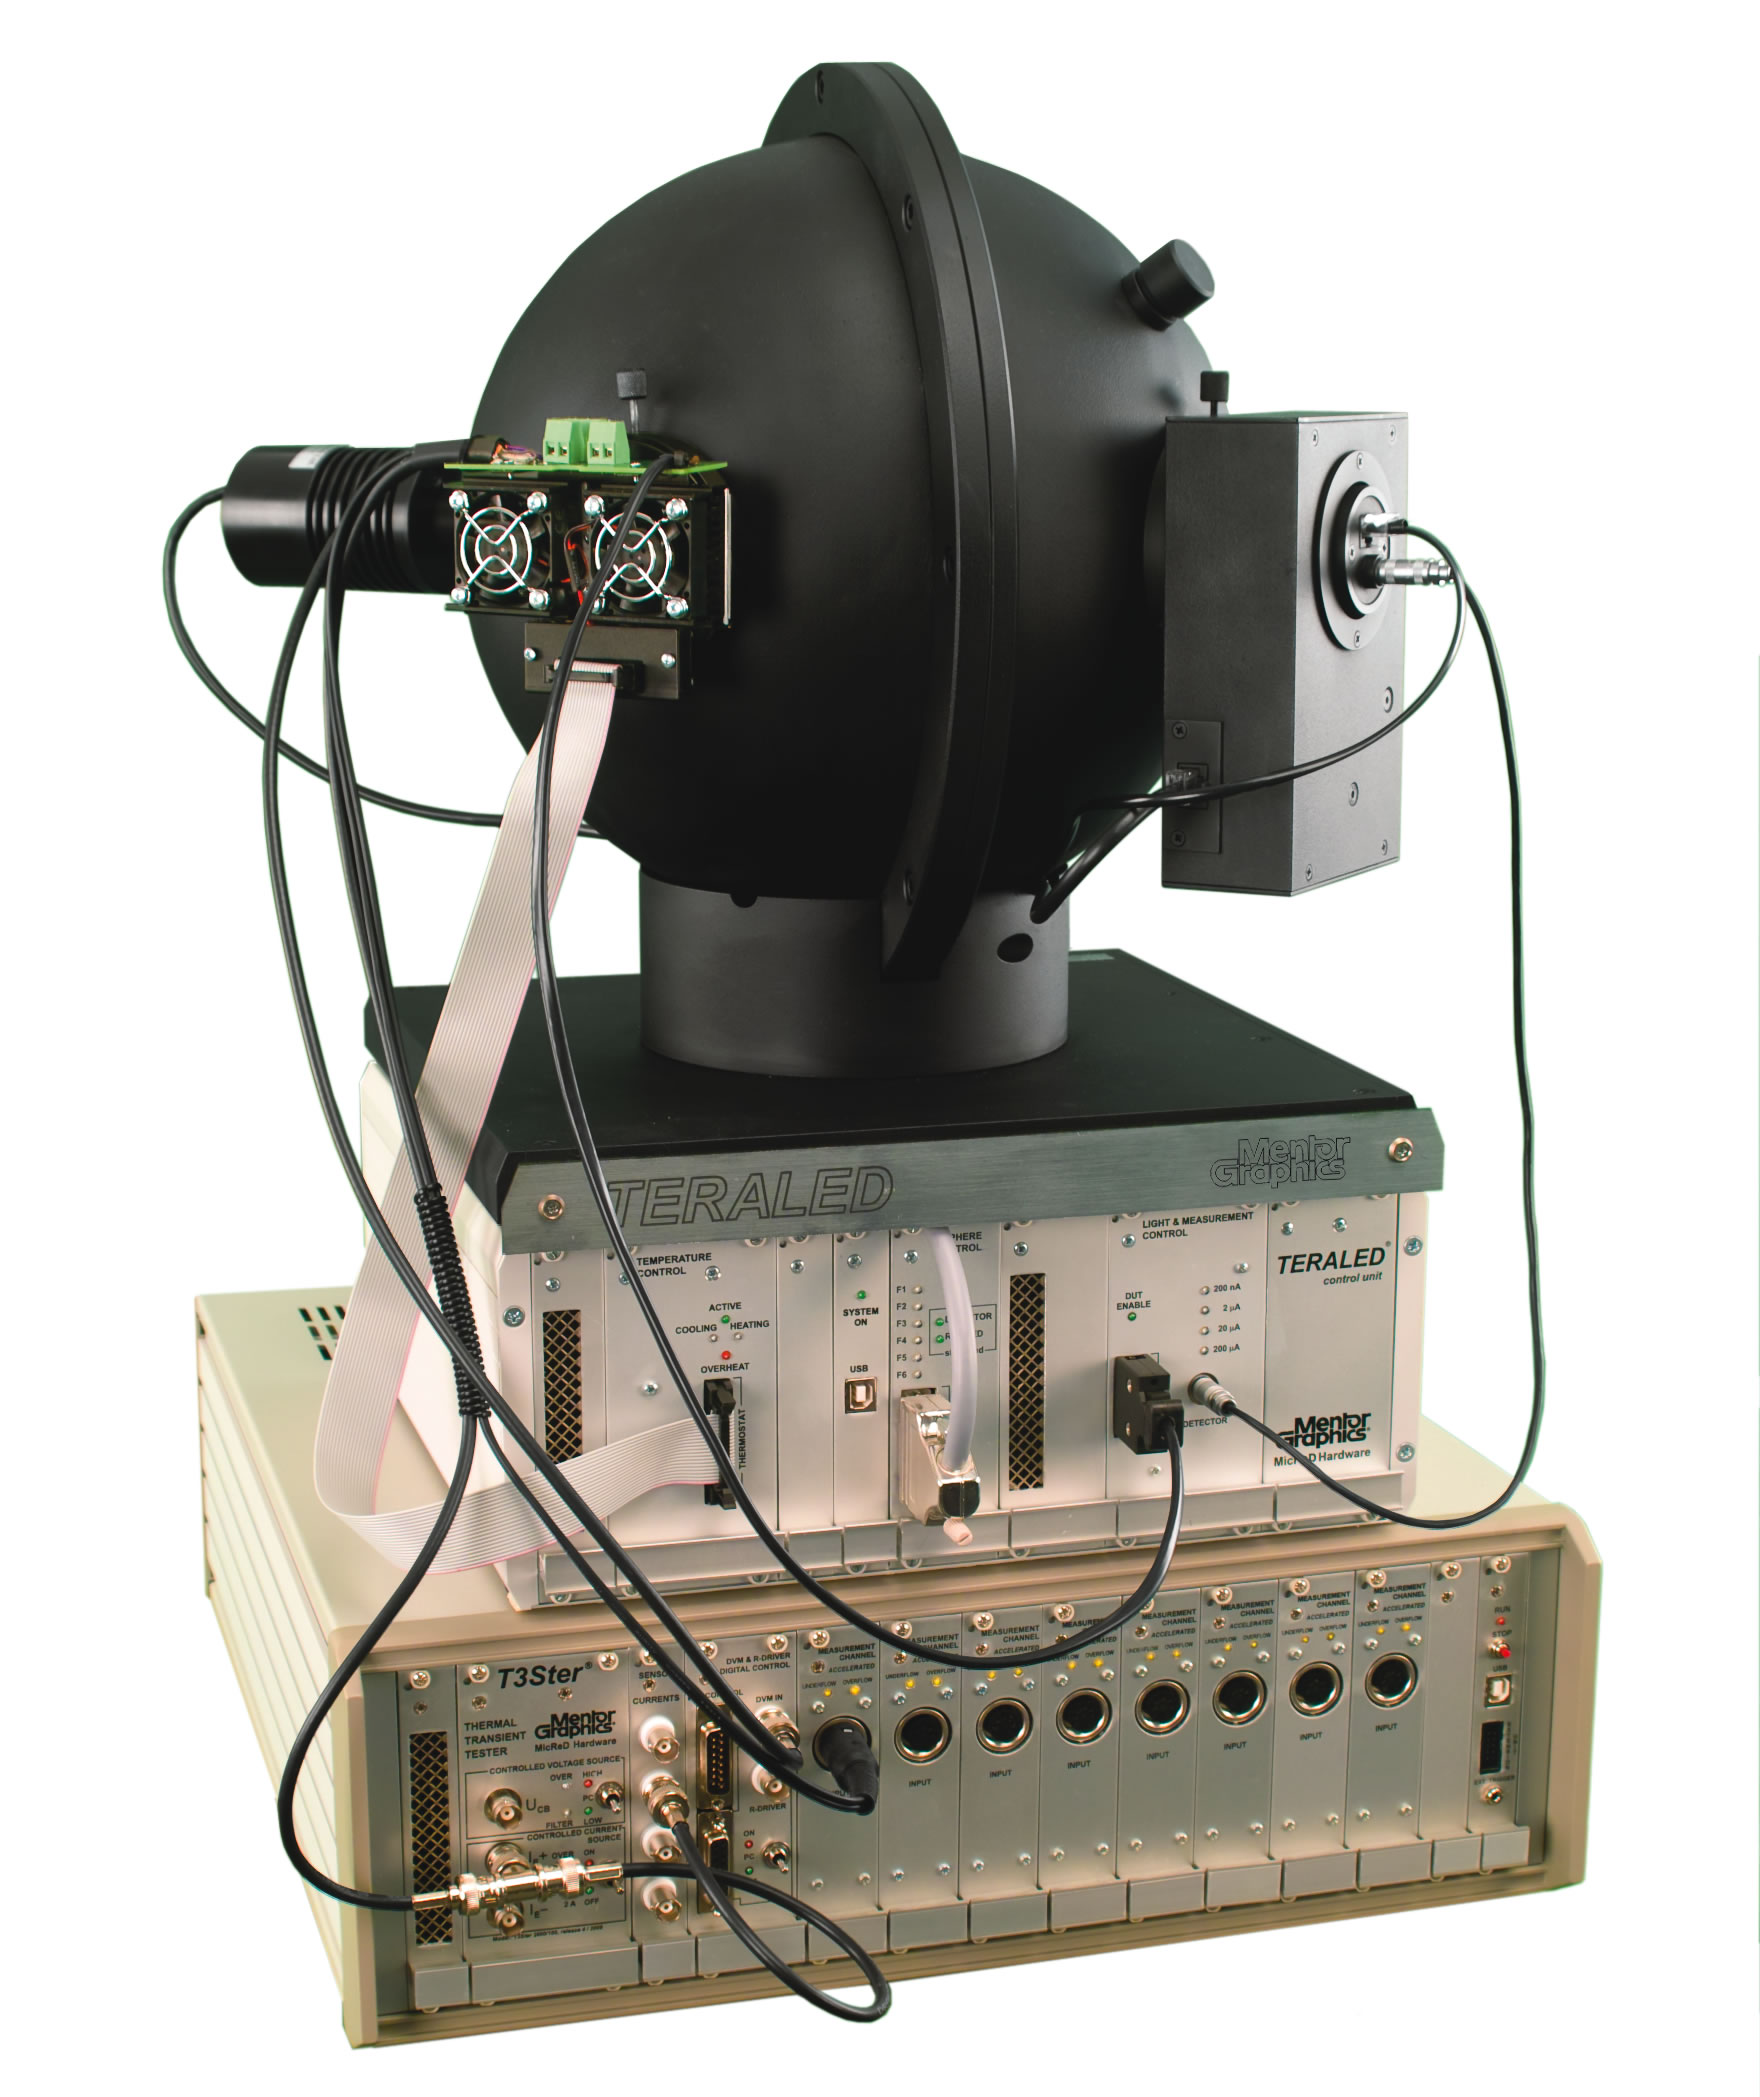 Figure 1: The TeraLED-T3Ster thermal characterisation and measurement system